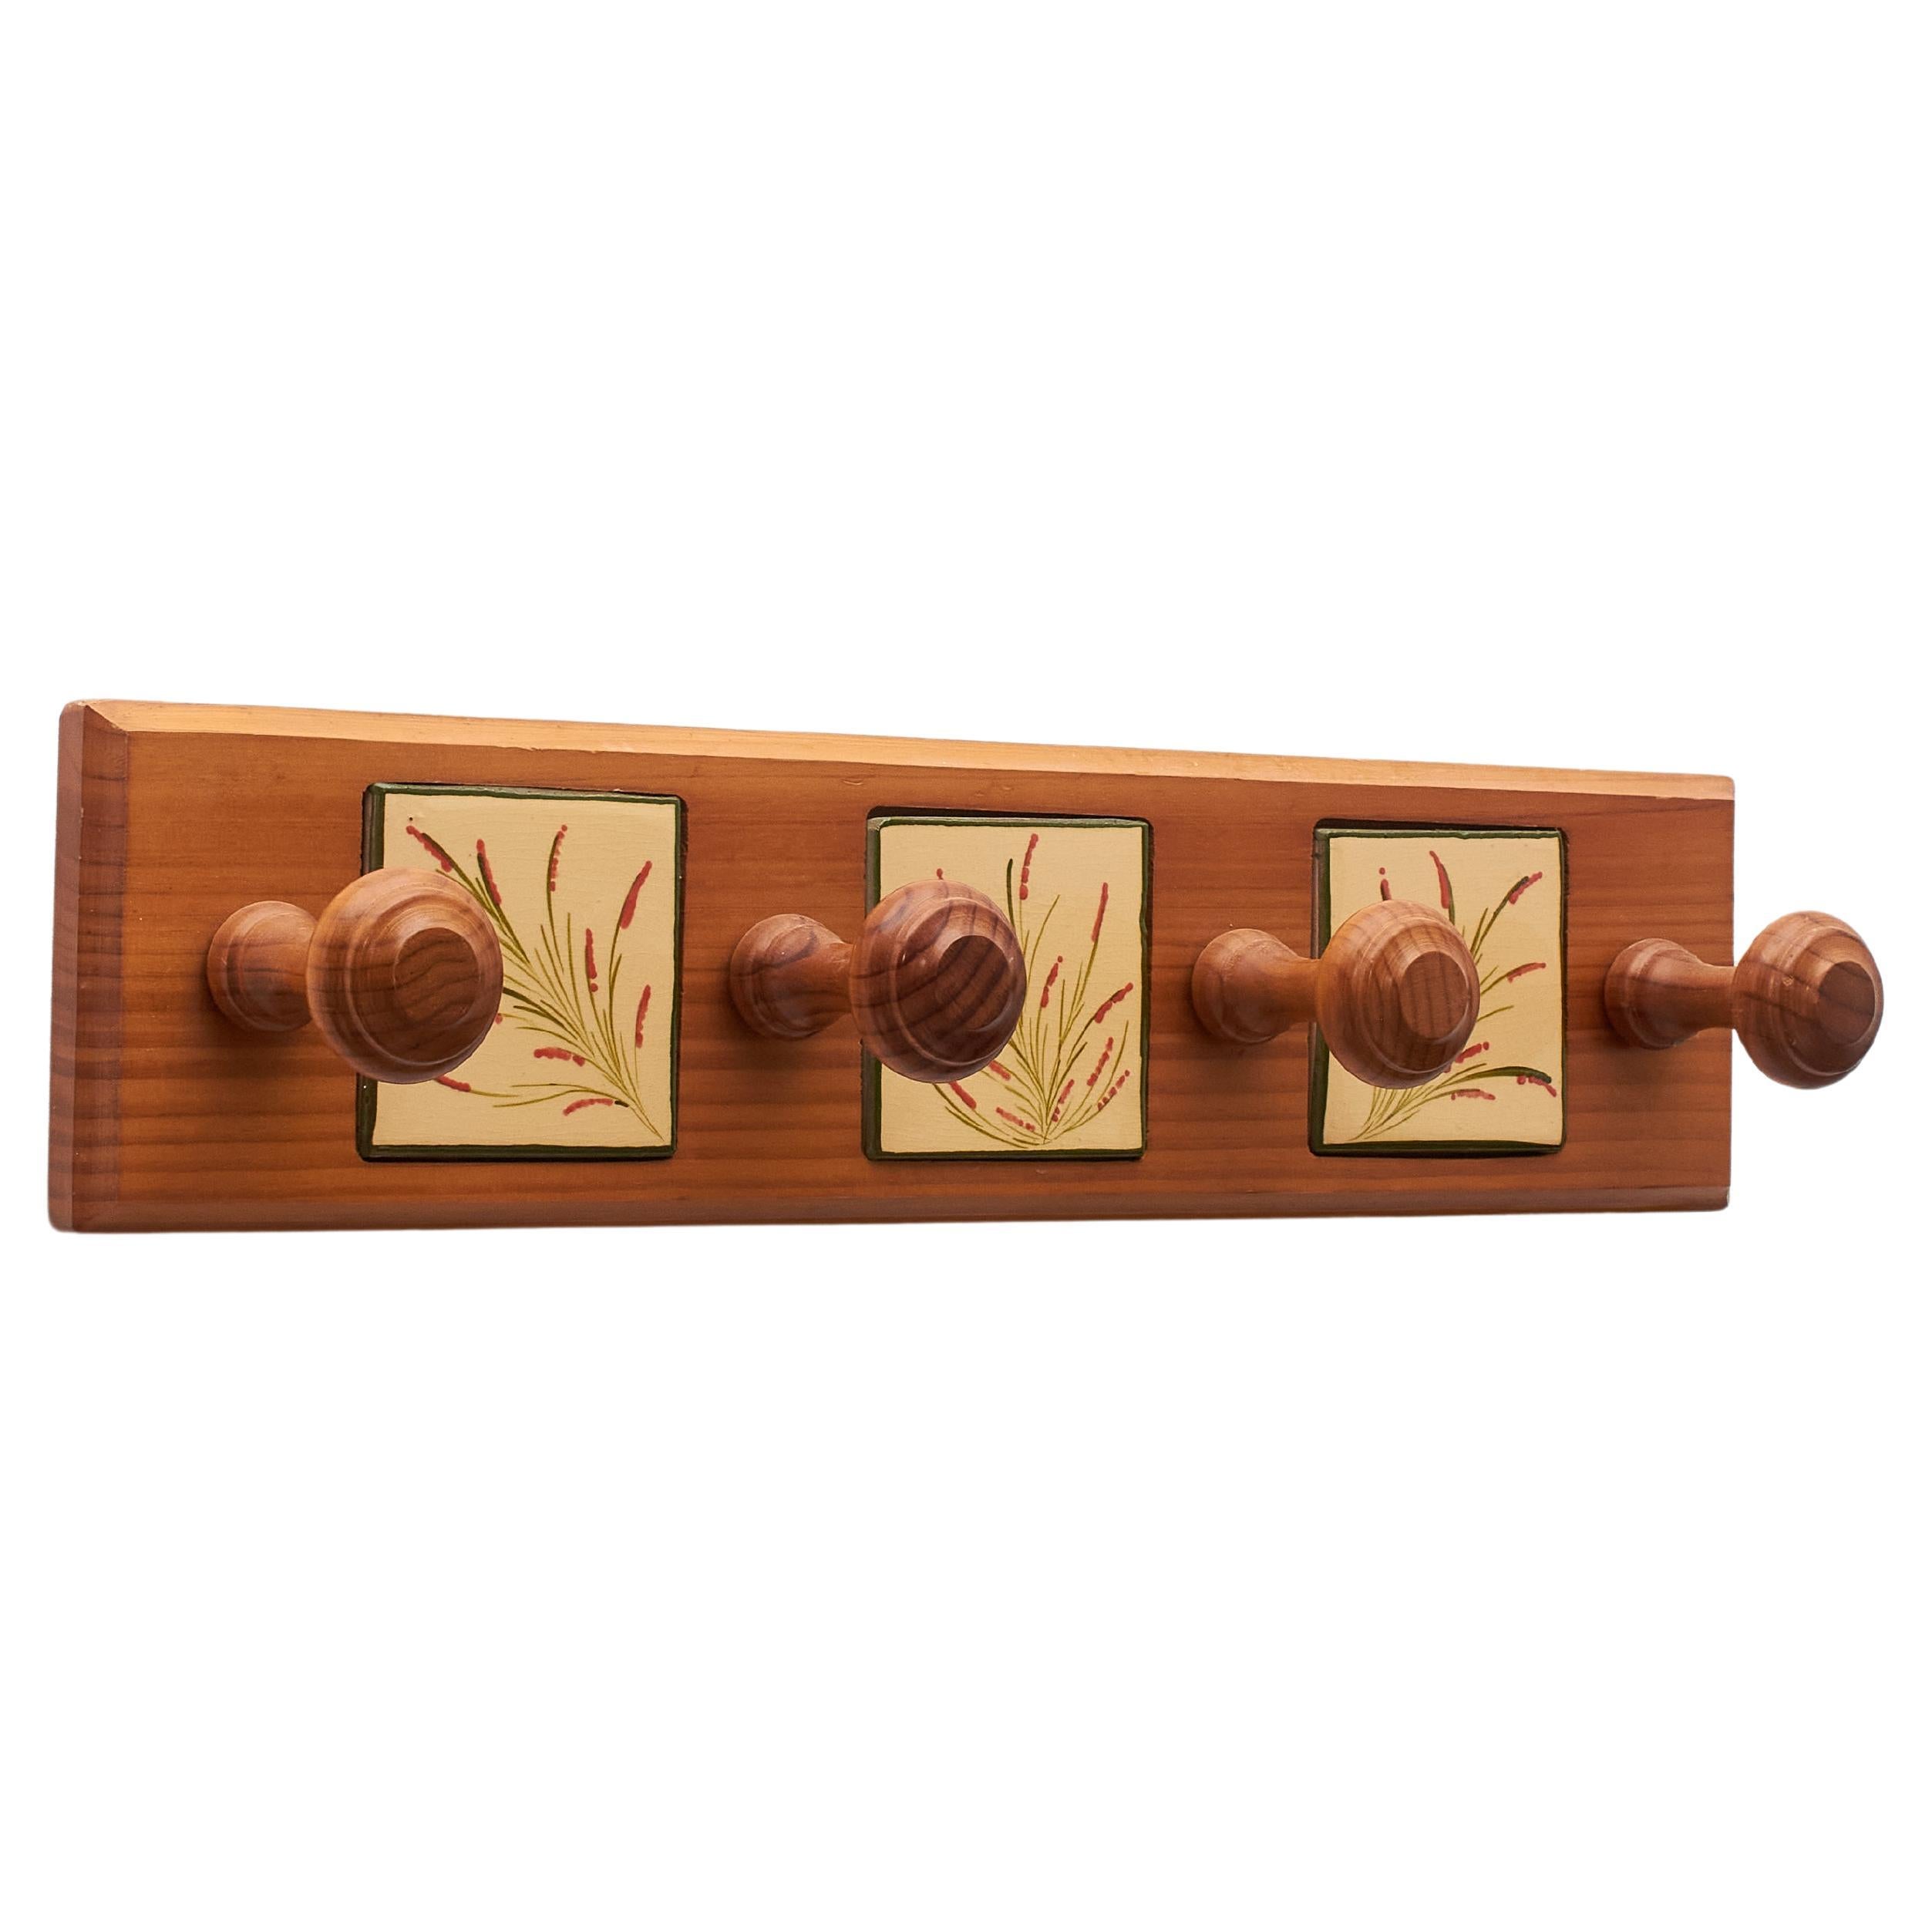 Vintage 1960 Catalan Artist Diaz Costa Hand-Painted Ceramic and Wood Hanger For Sale